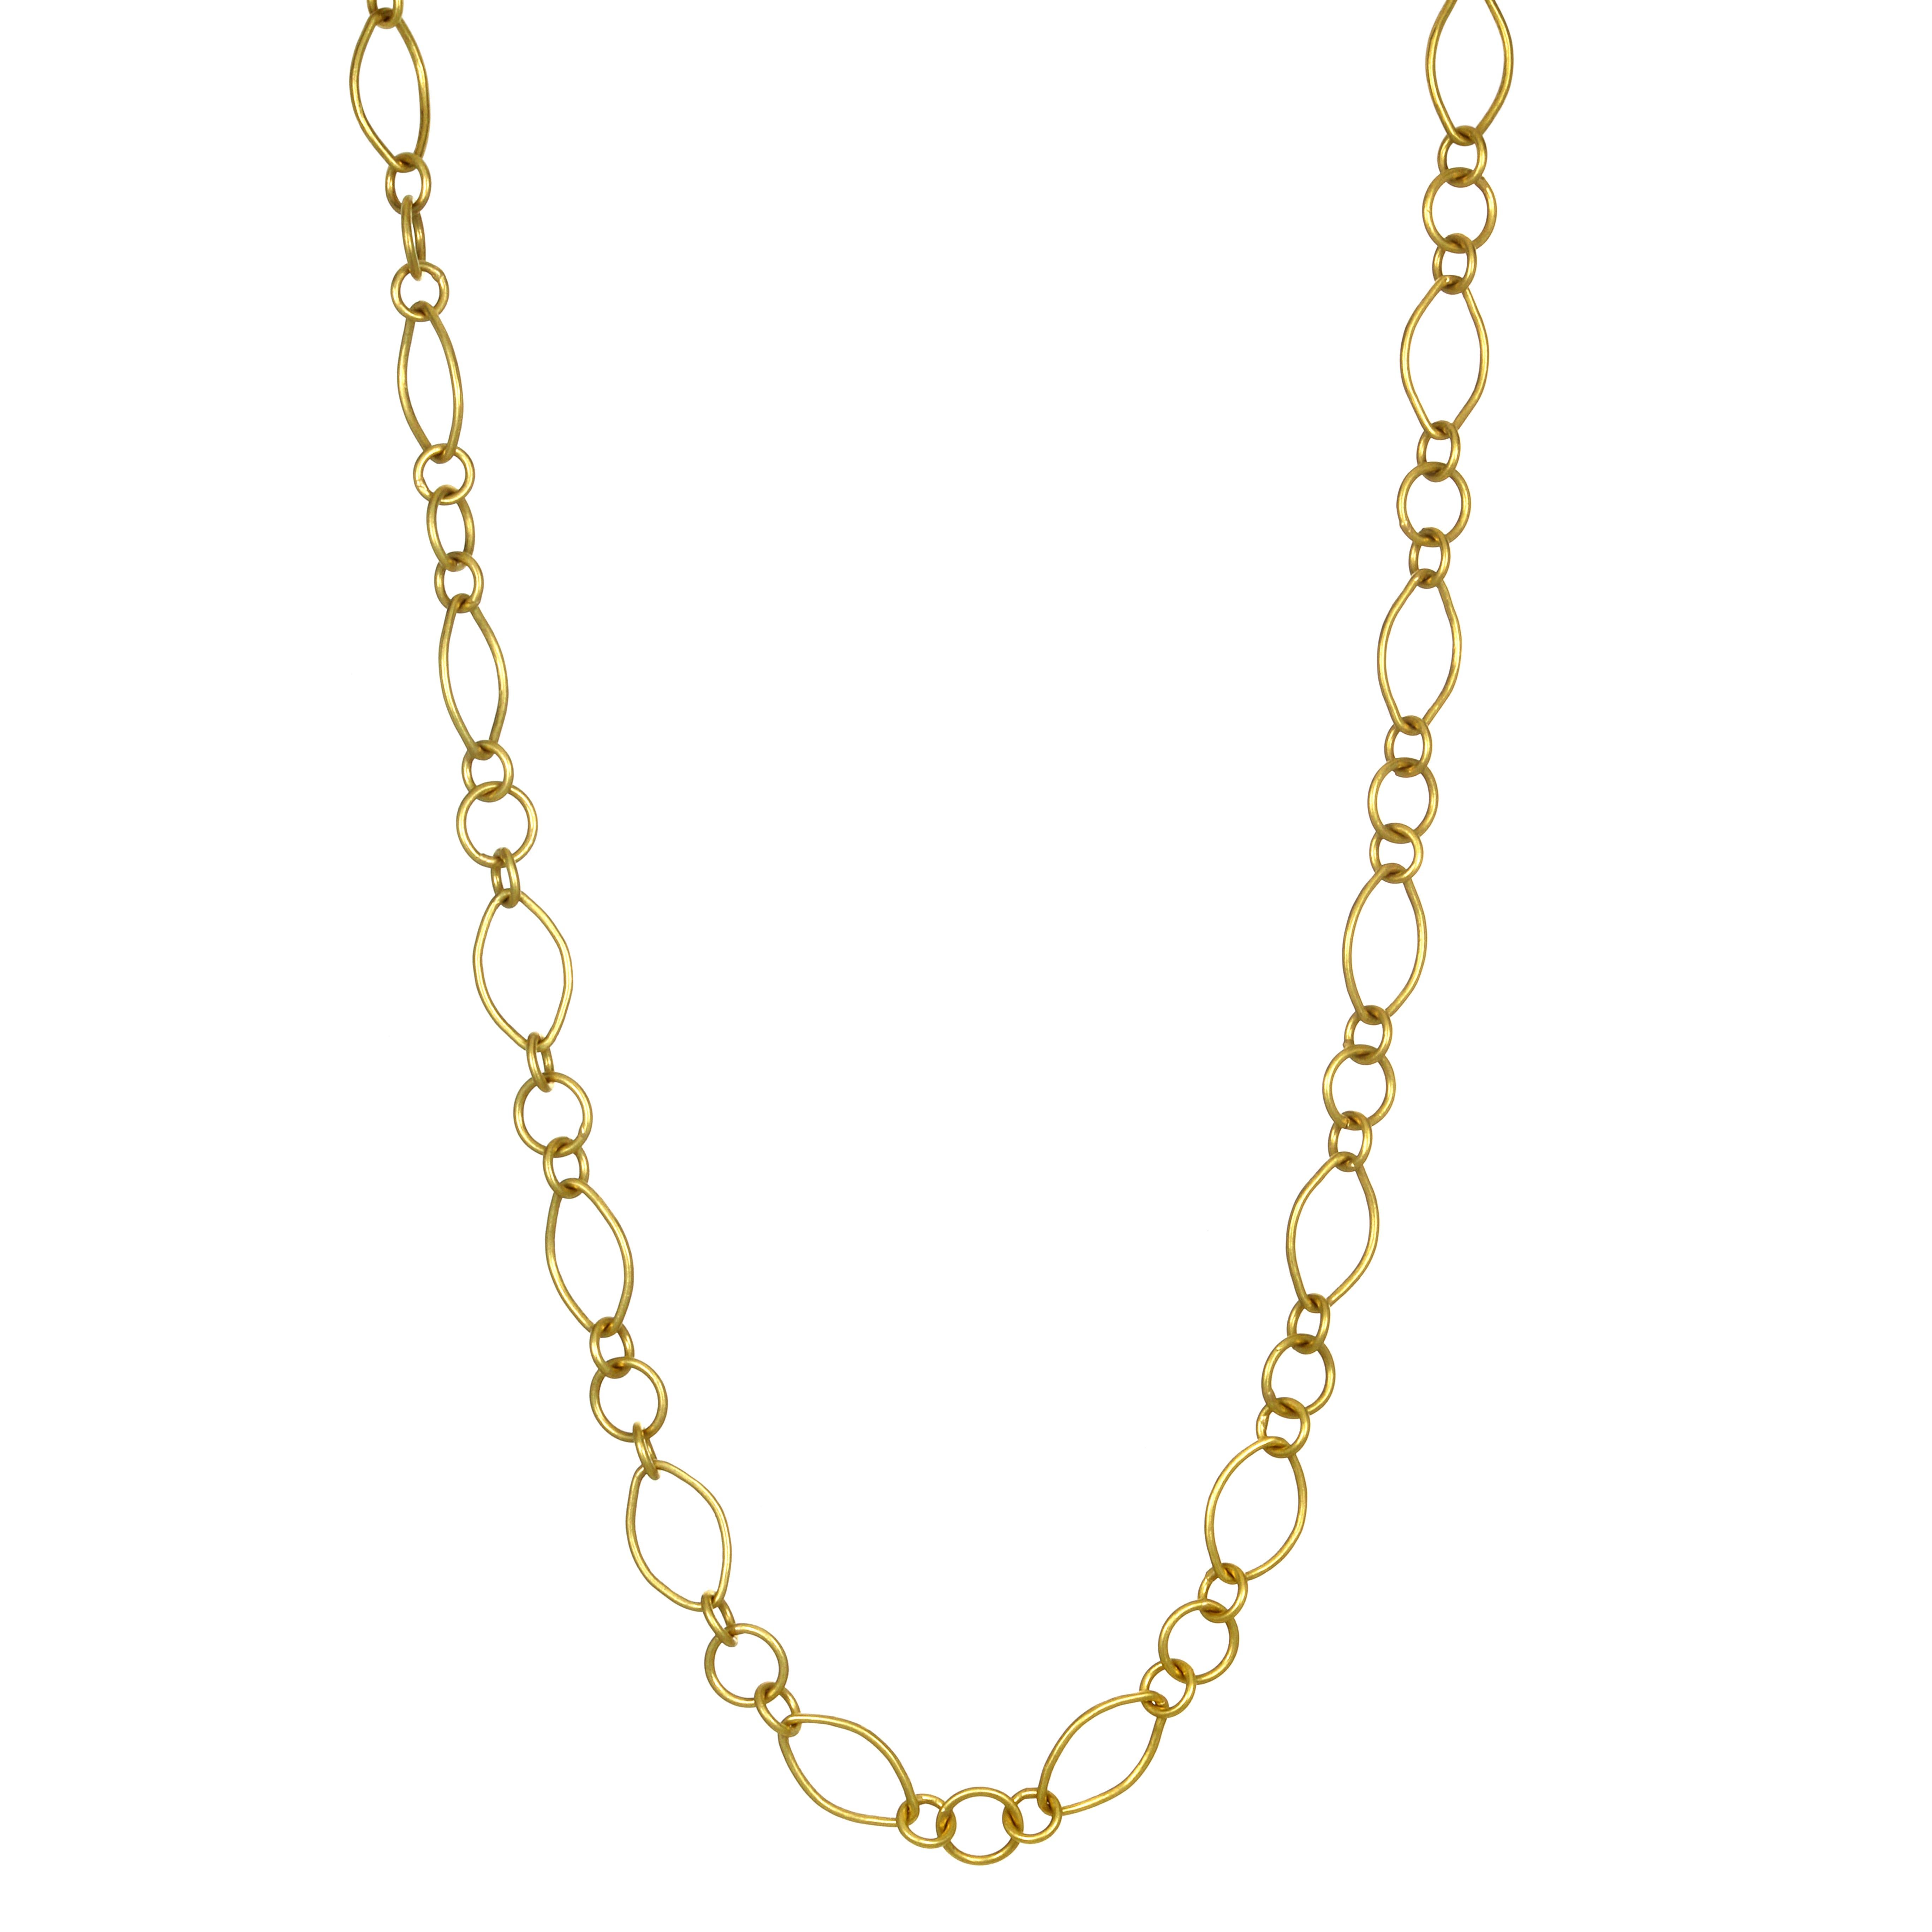 Faye Kim 18 Karat Handmade Mini Marquise Link Chain
Classic and versatile, Faye's 18k gold handmade marquise link chain is a must have in every jewelry wardrobe.  Alternating mixed shaped links give texture and uniqueness to this chain bringing it